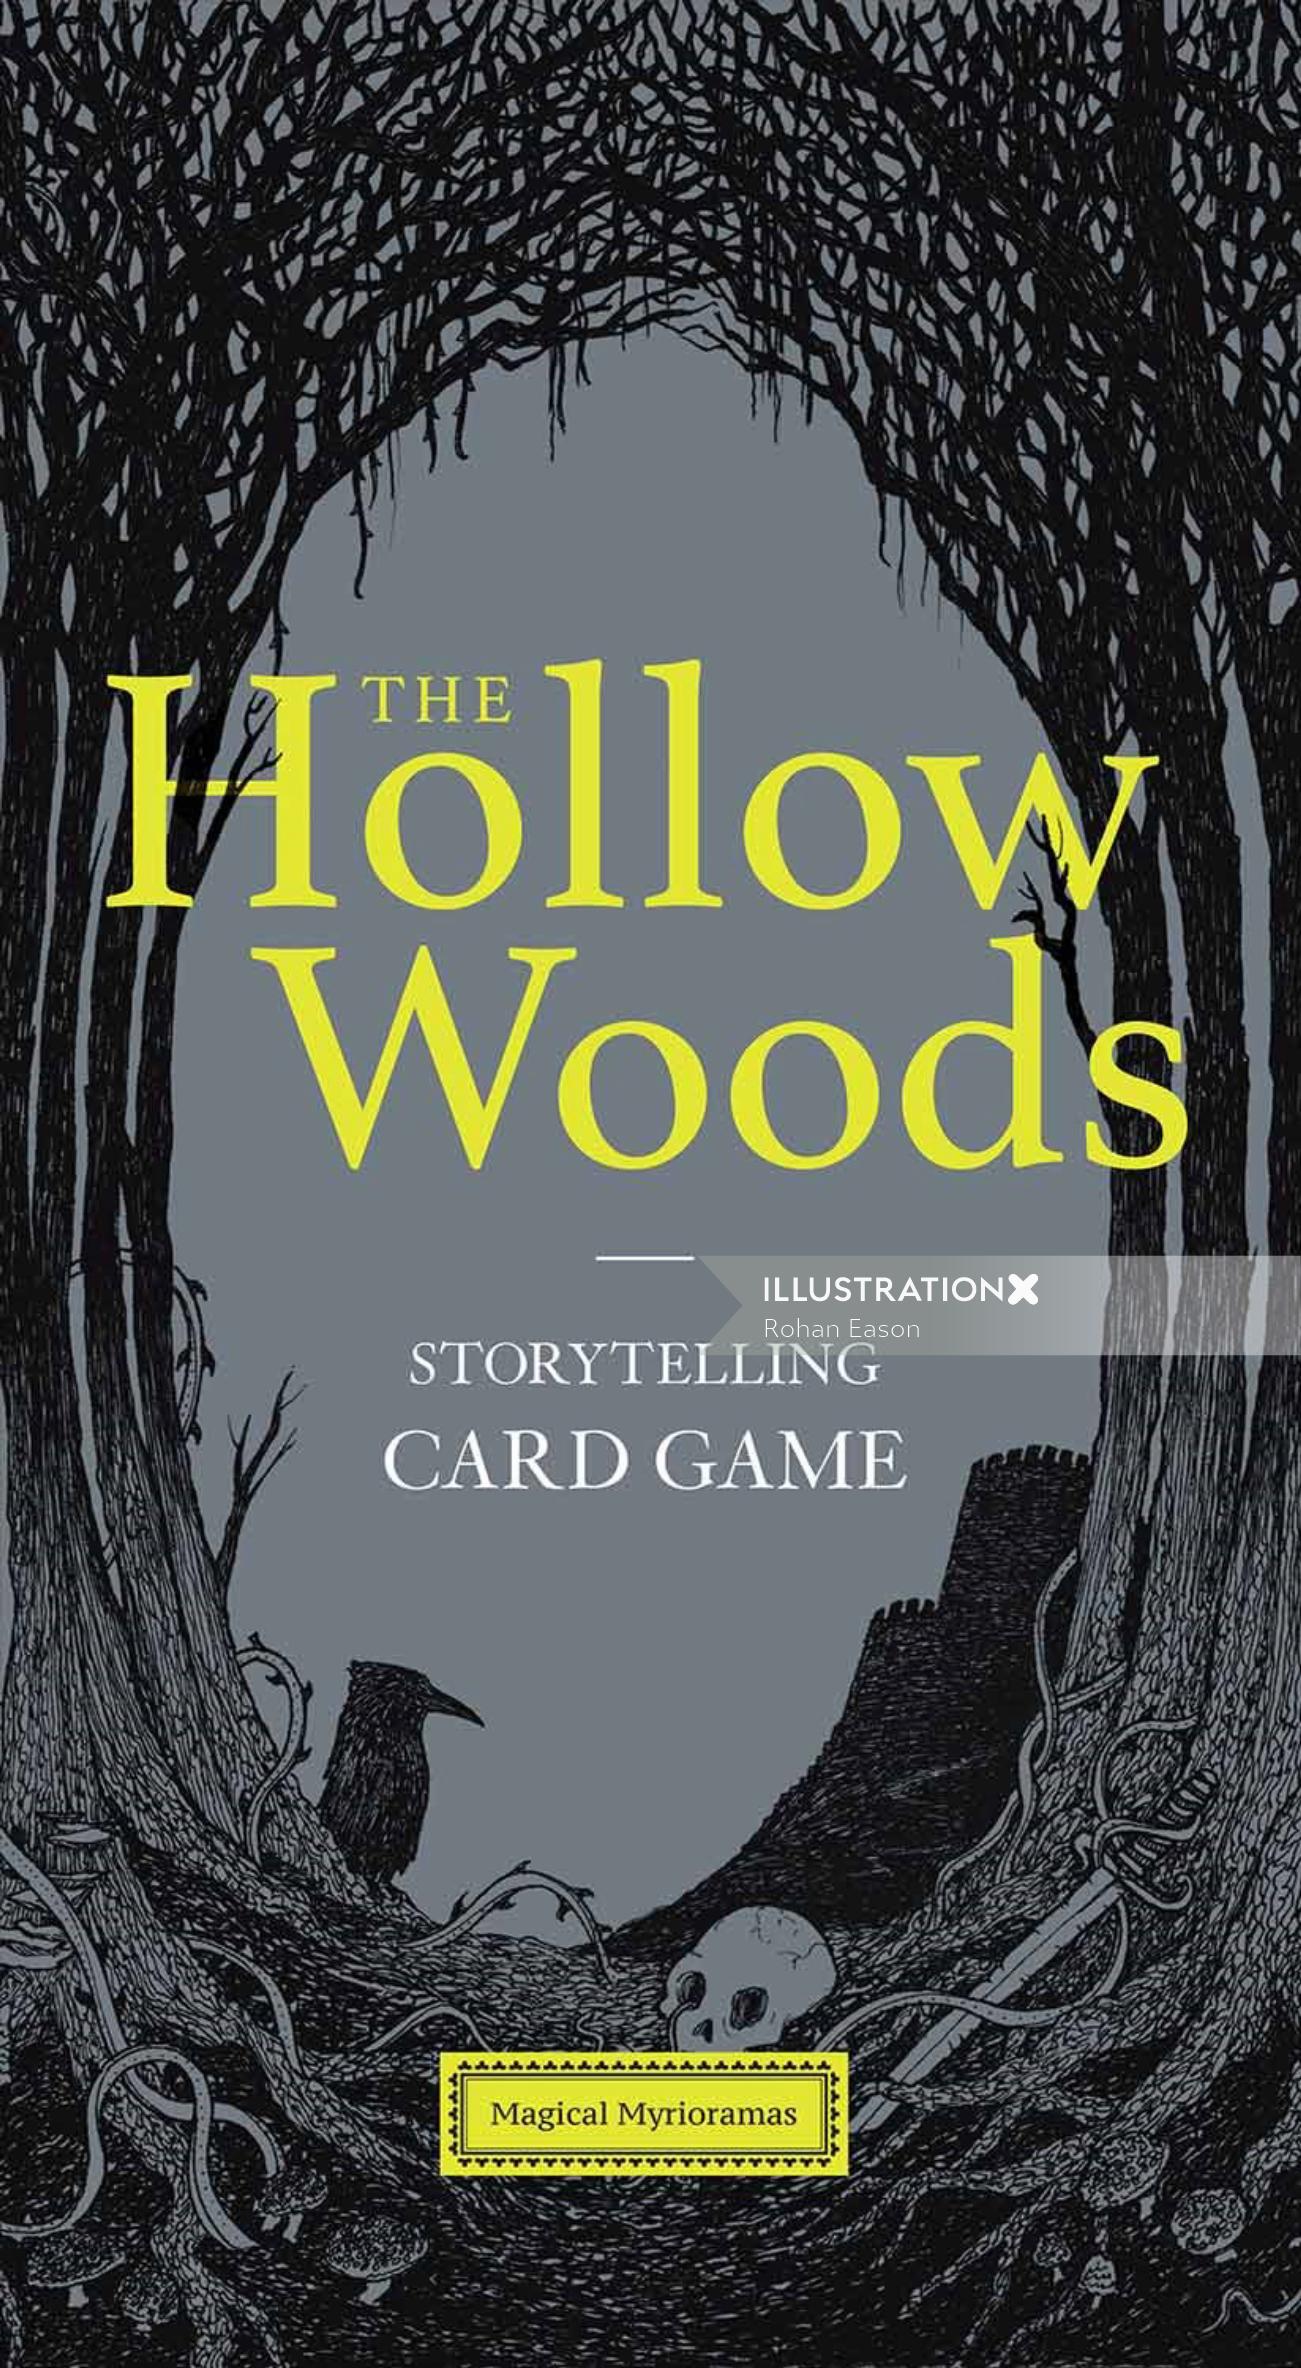 Fantasy book cover design of the hollow woods 